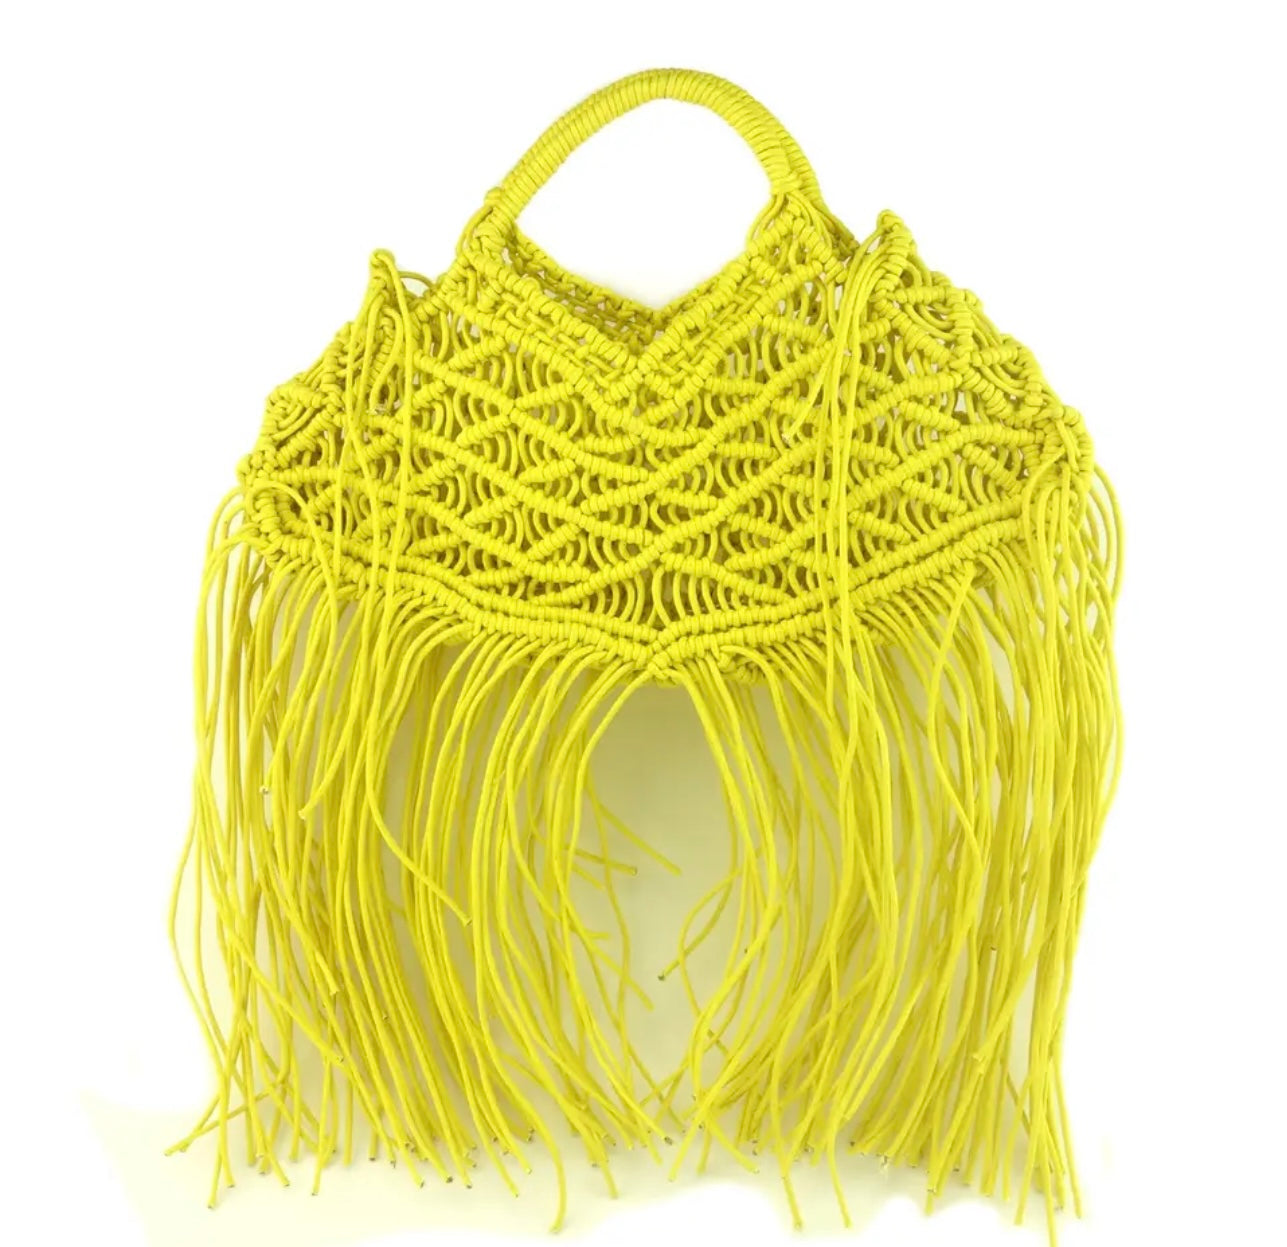 Vacation Style Bohemian Tote Bag (Comes In Other Colors)